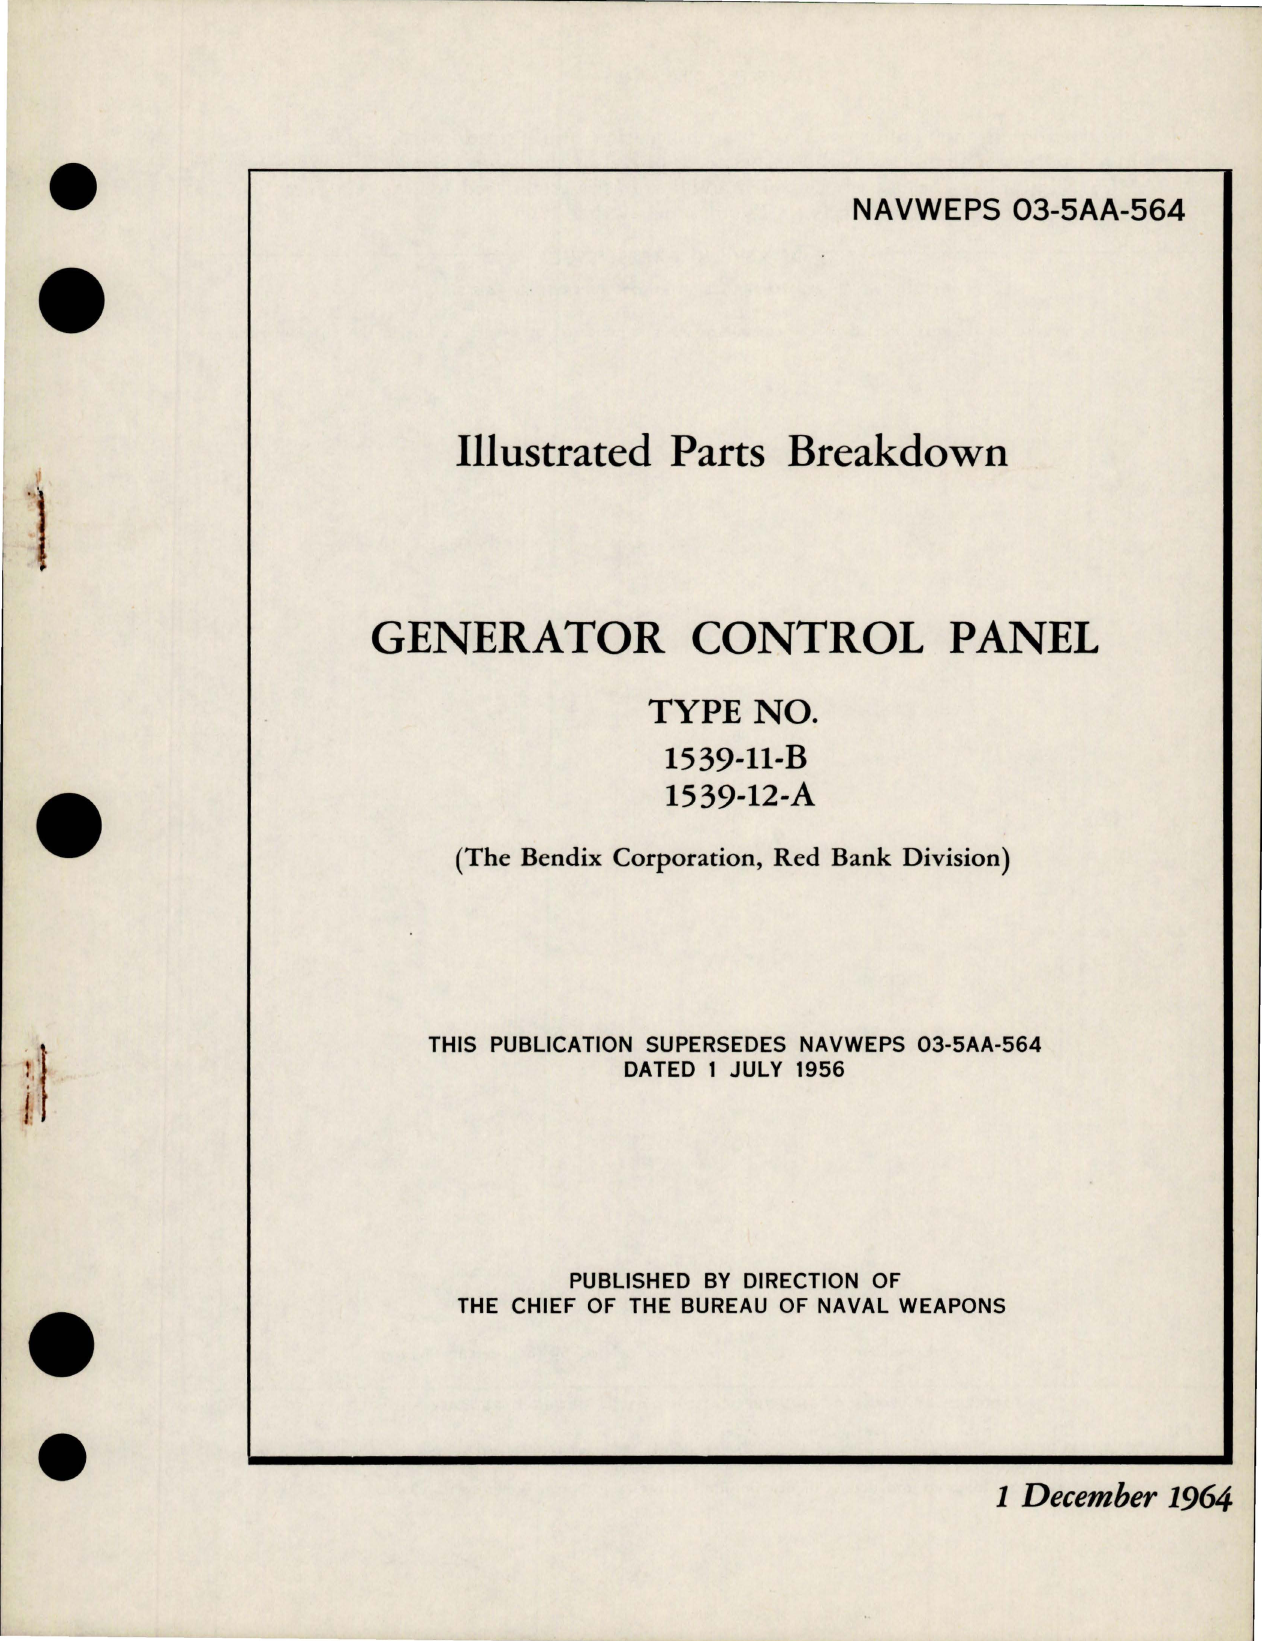 Sample page 1 from AirCorps Library document: Illustrated Parts Breakdown for Generator Control Panel - Type 1539-11-B and 1539-12-A